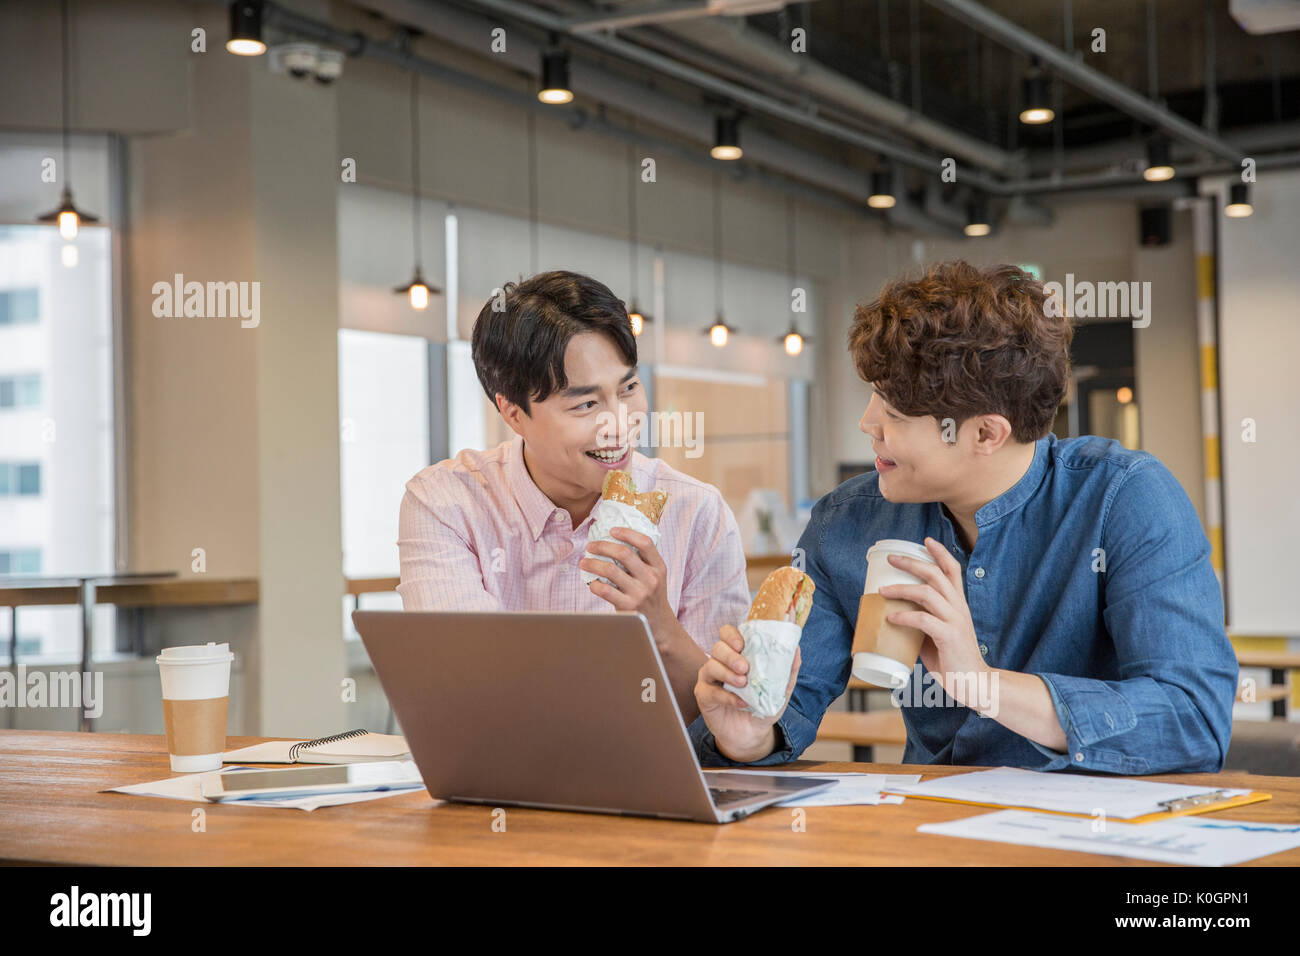 Portrait of two smiling businessmen with sandwiches having a talk sharing a notebook computer at cafeteria Stock Photo